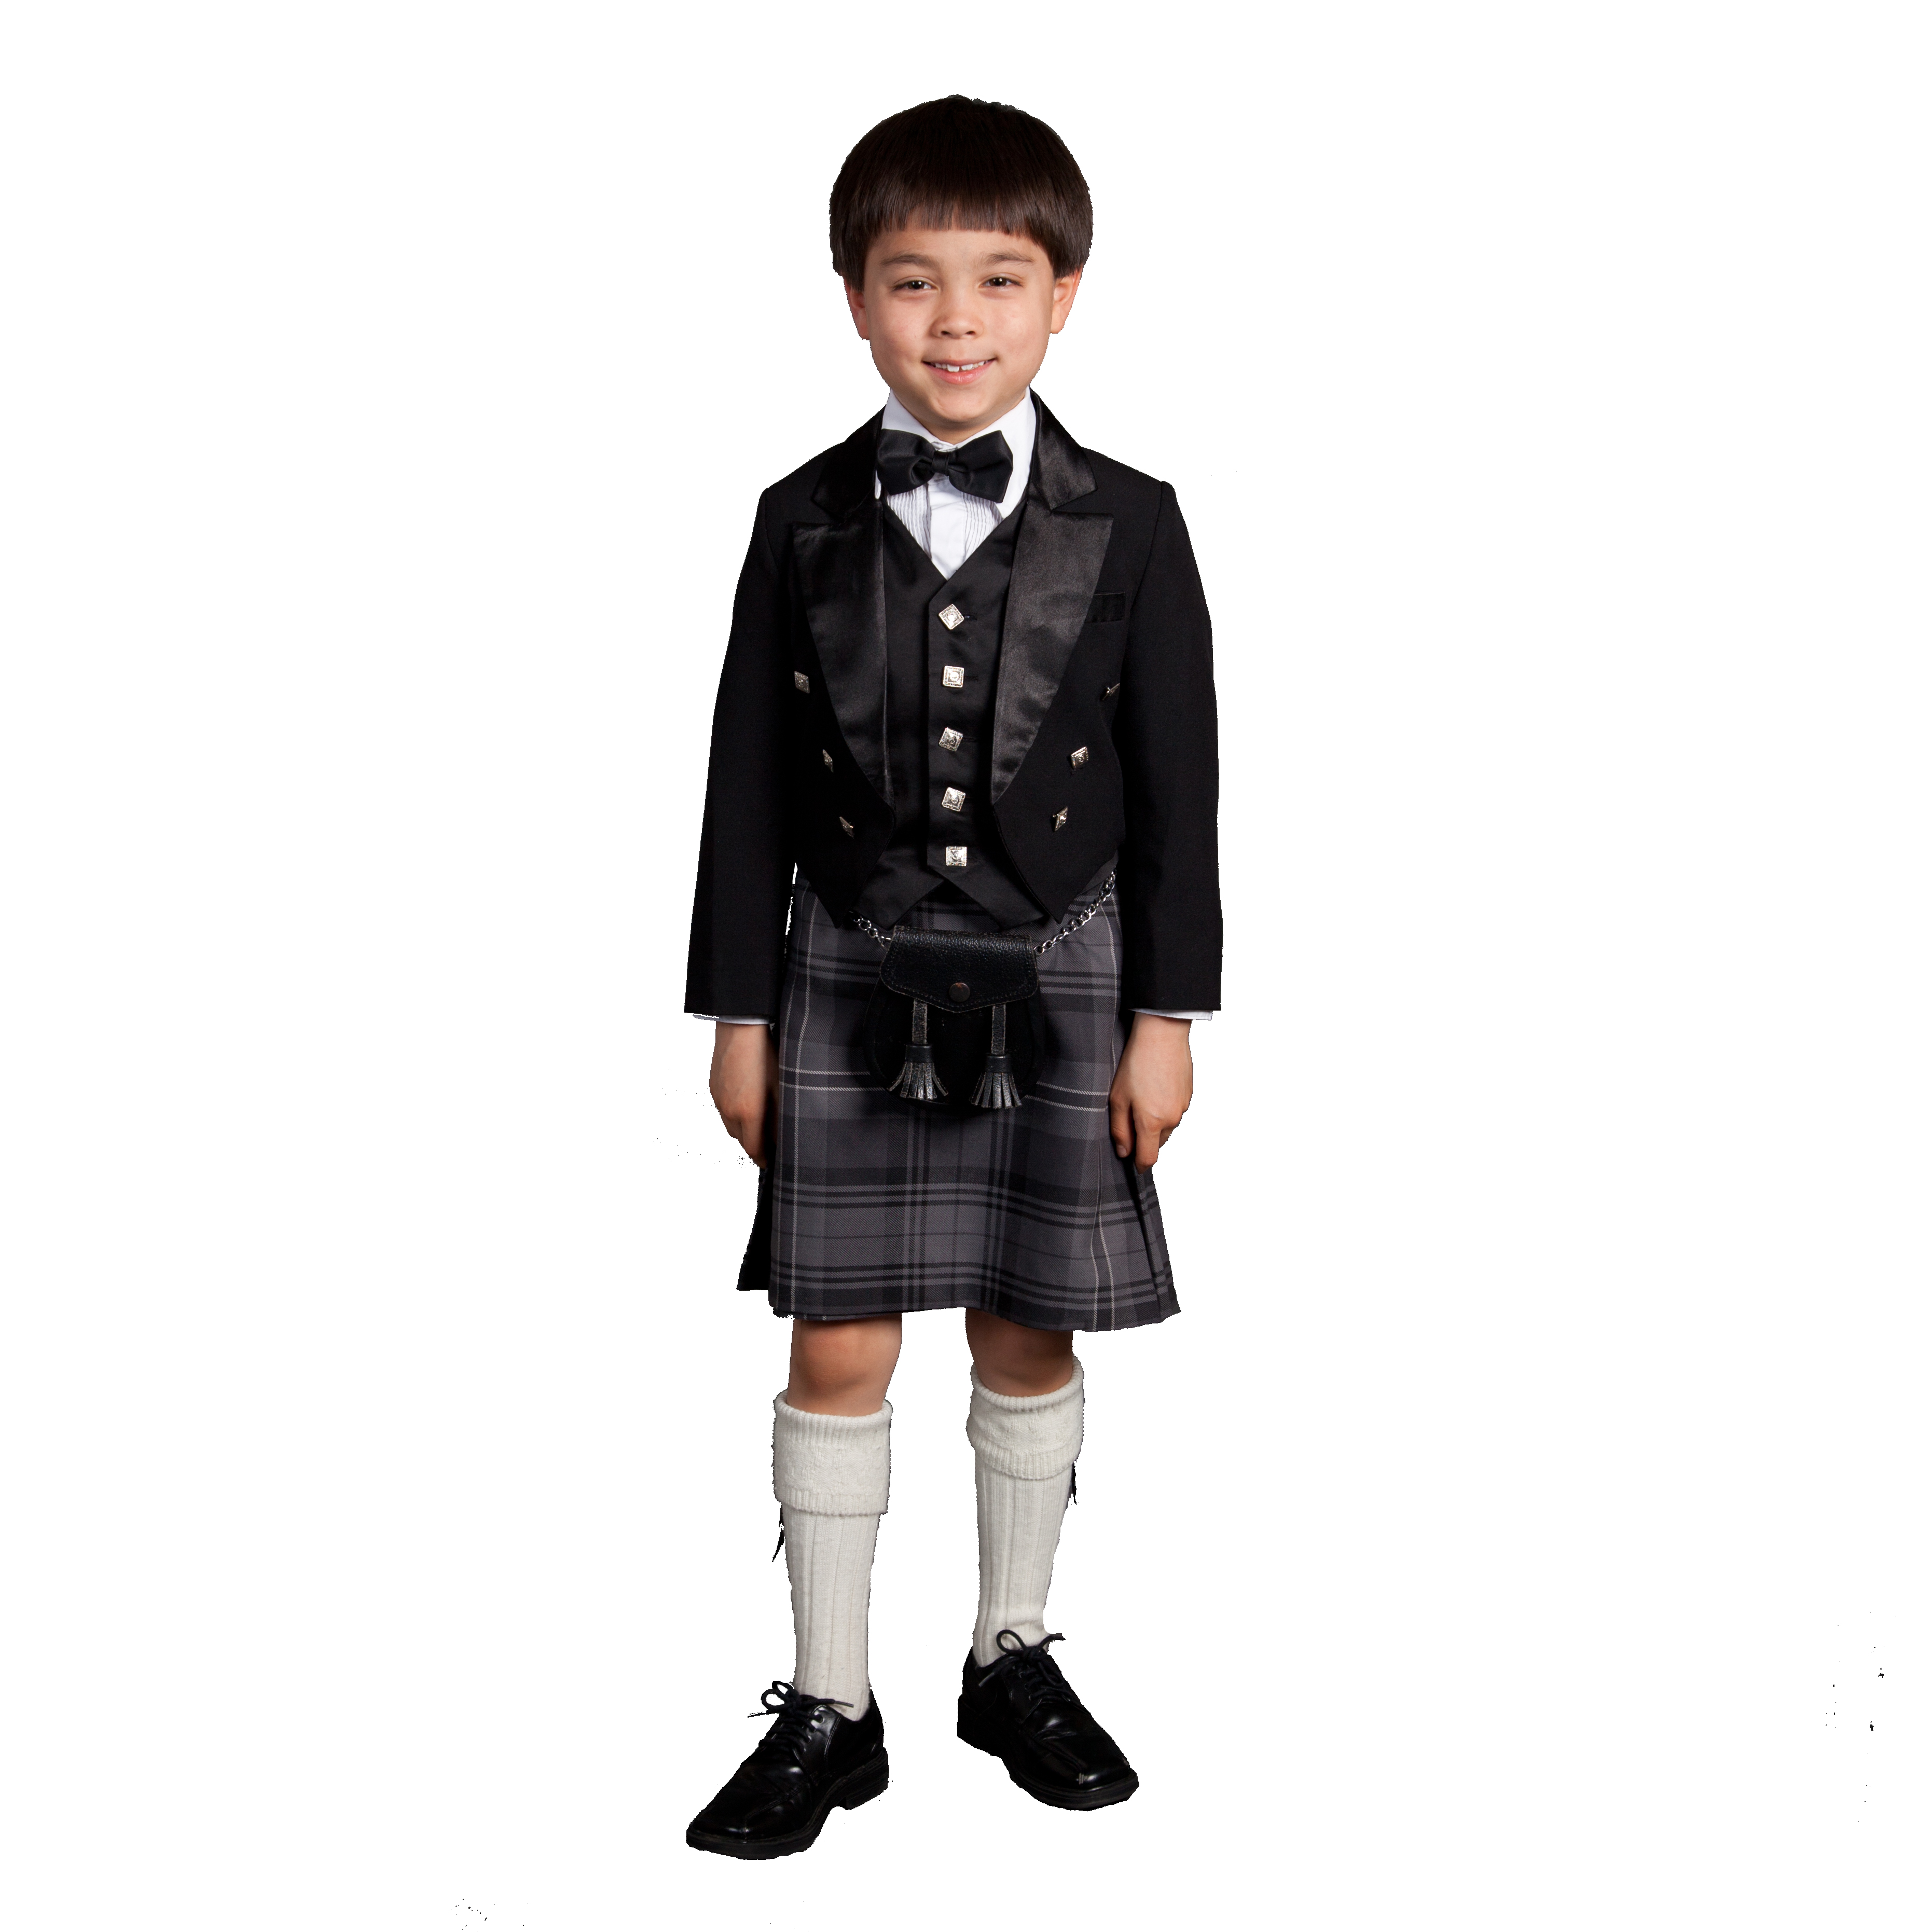 Kids Casual Polyviscose Heritage of Scotland Kilt aged 0-12 Available 